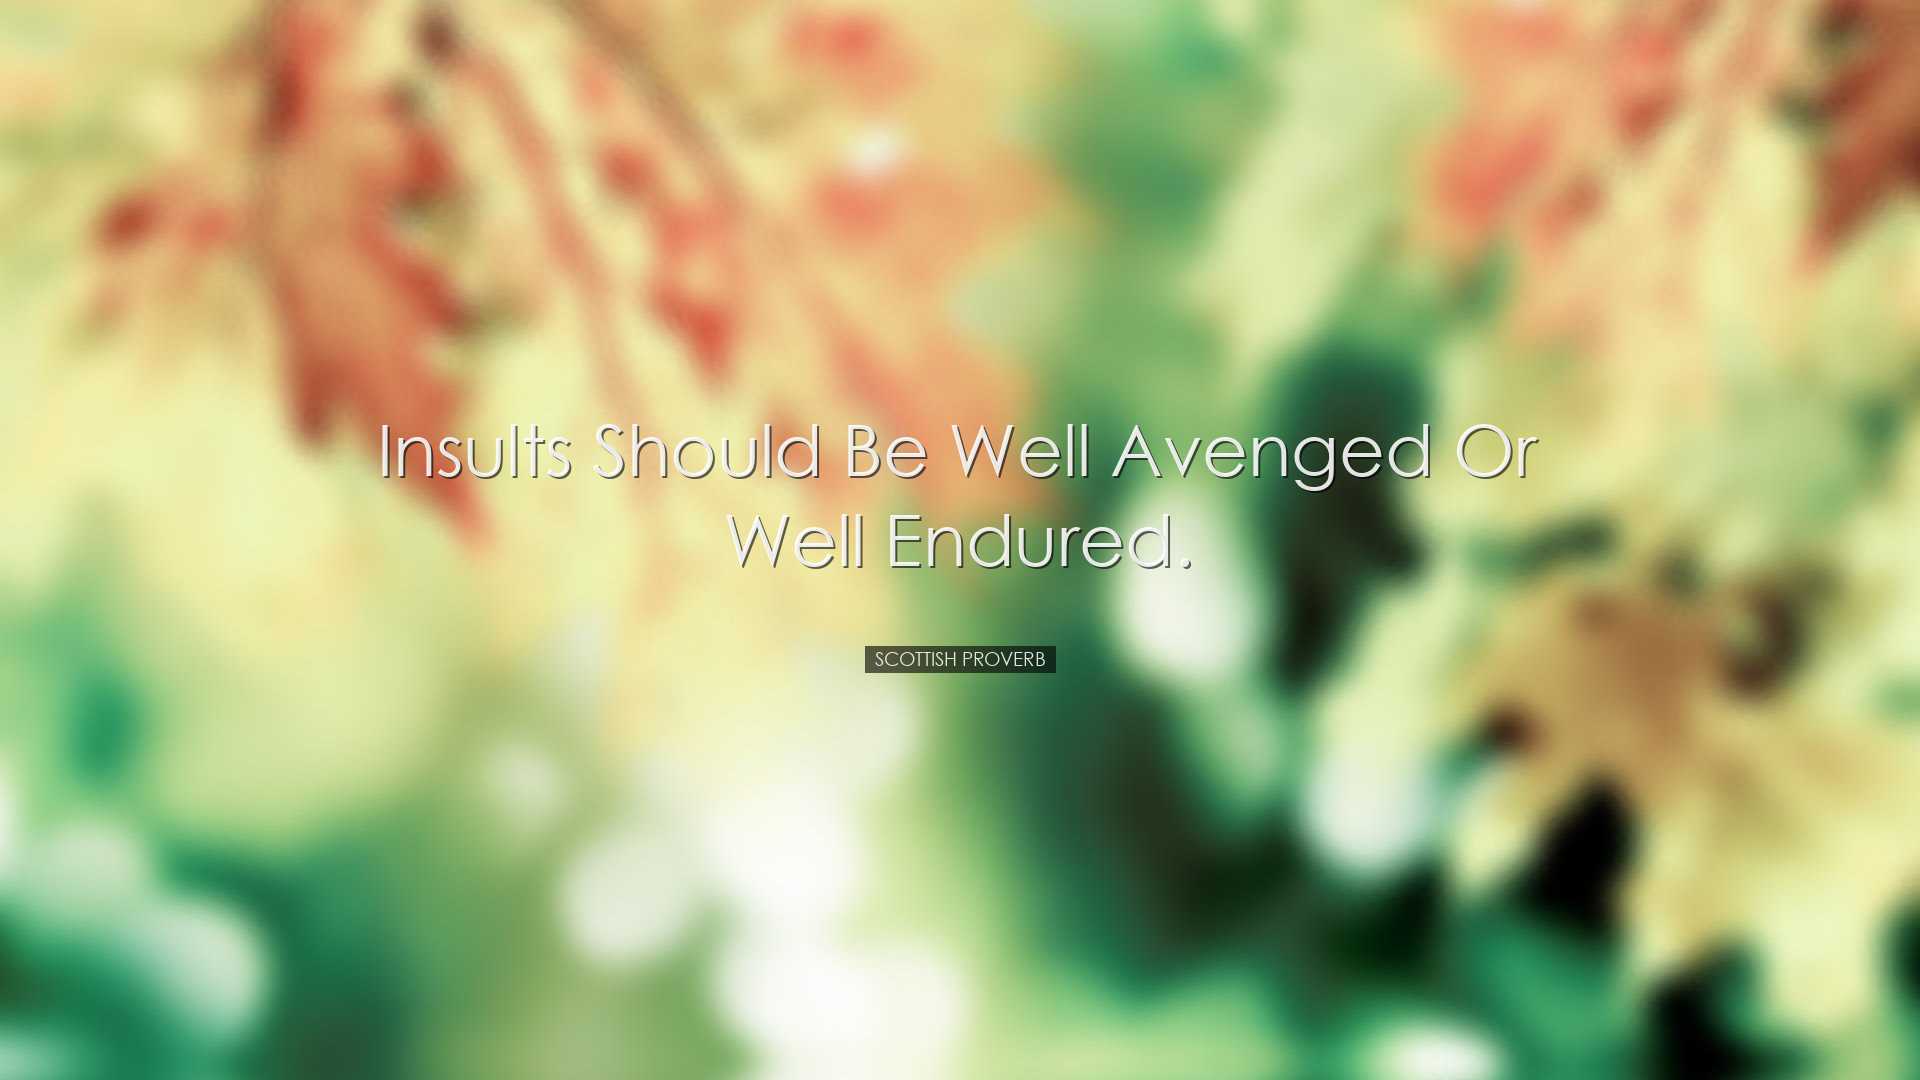 Insults should be well avenged or well endured. - Scottish Proverb